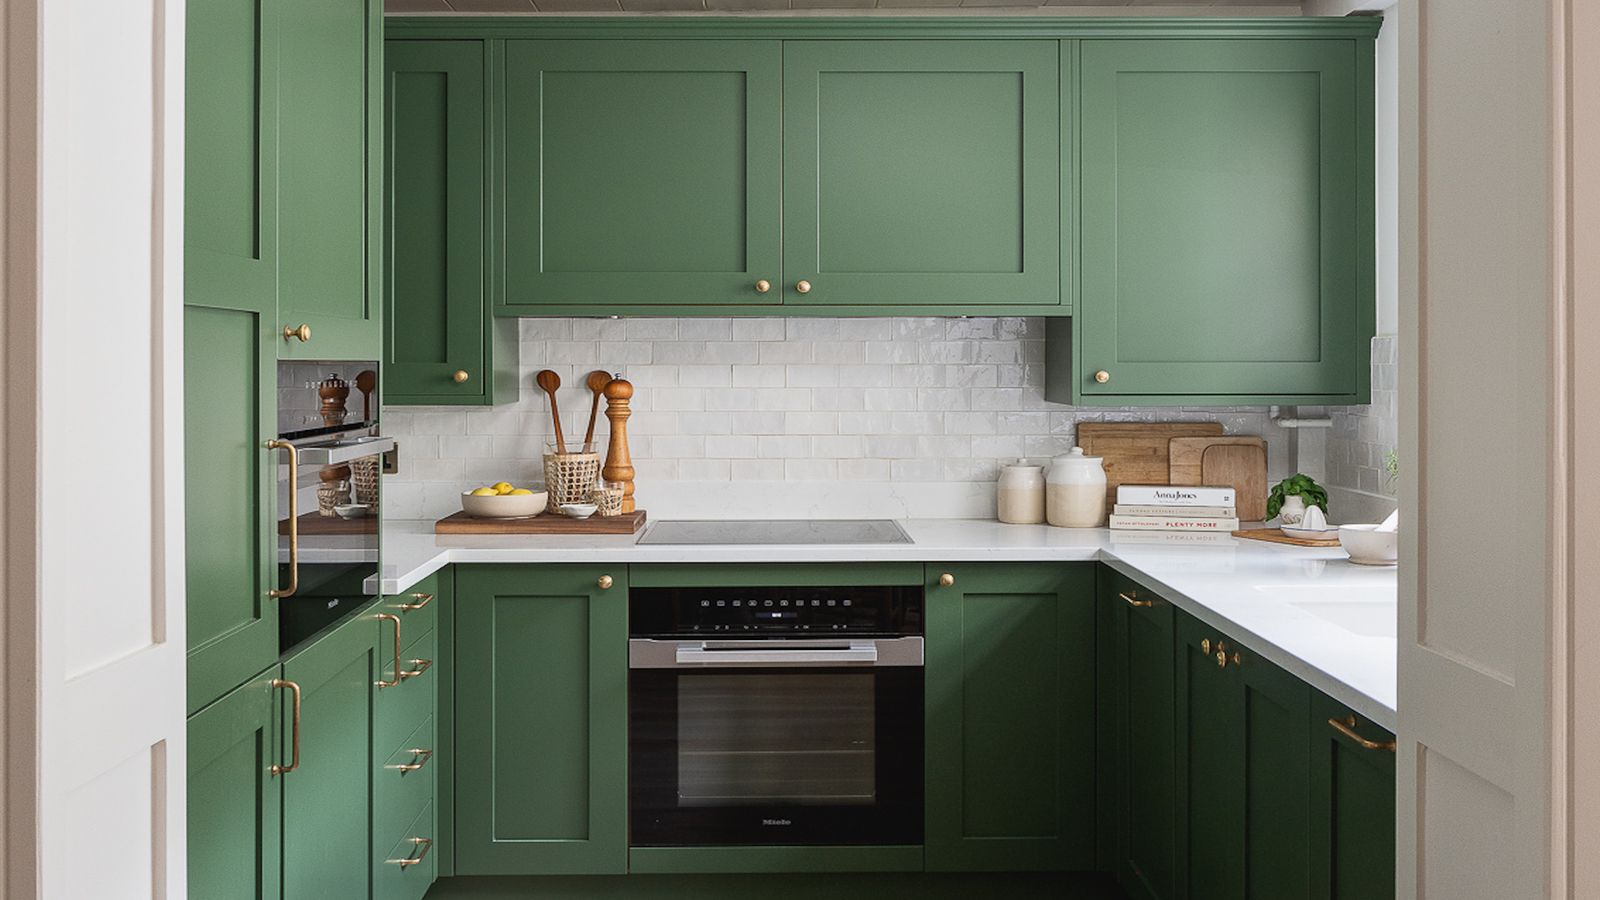 Small kitchen color ideas: 10 hues for walls and cabinets | Woman & Home